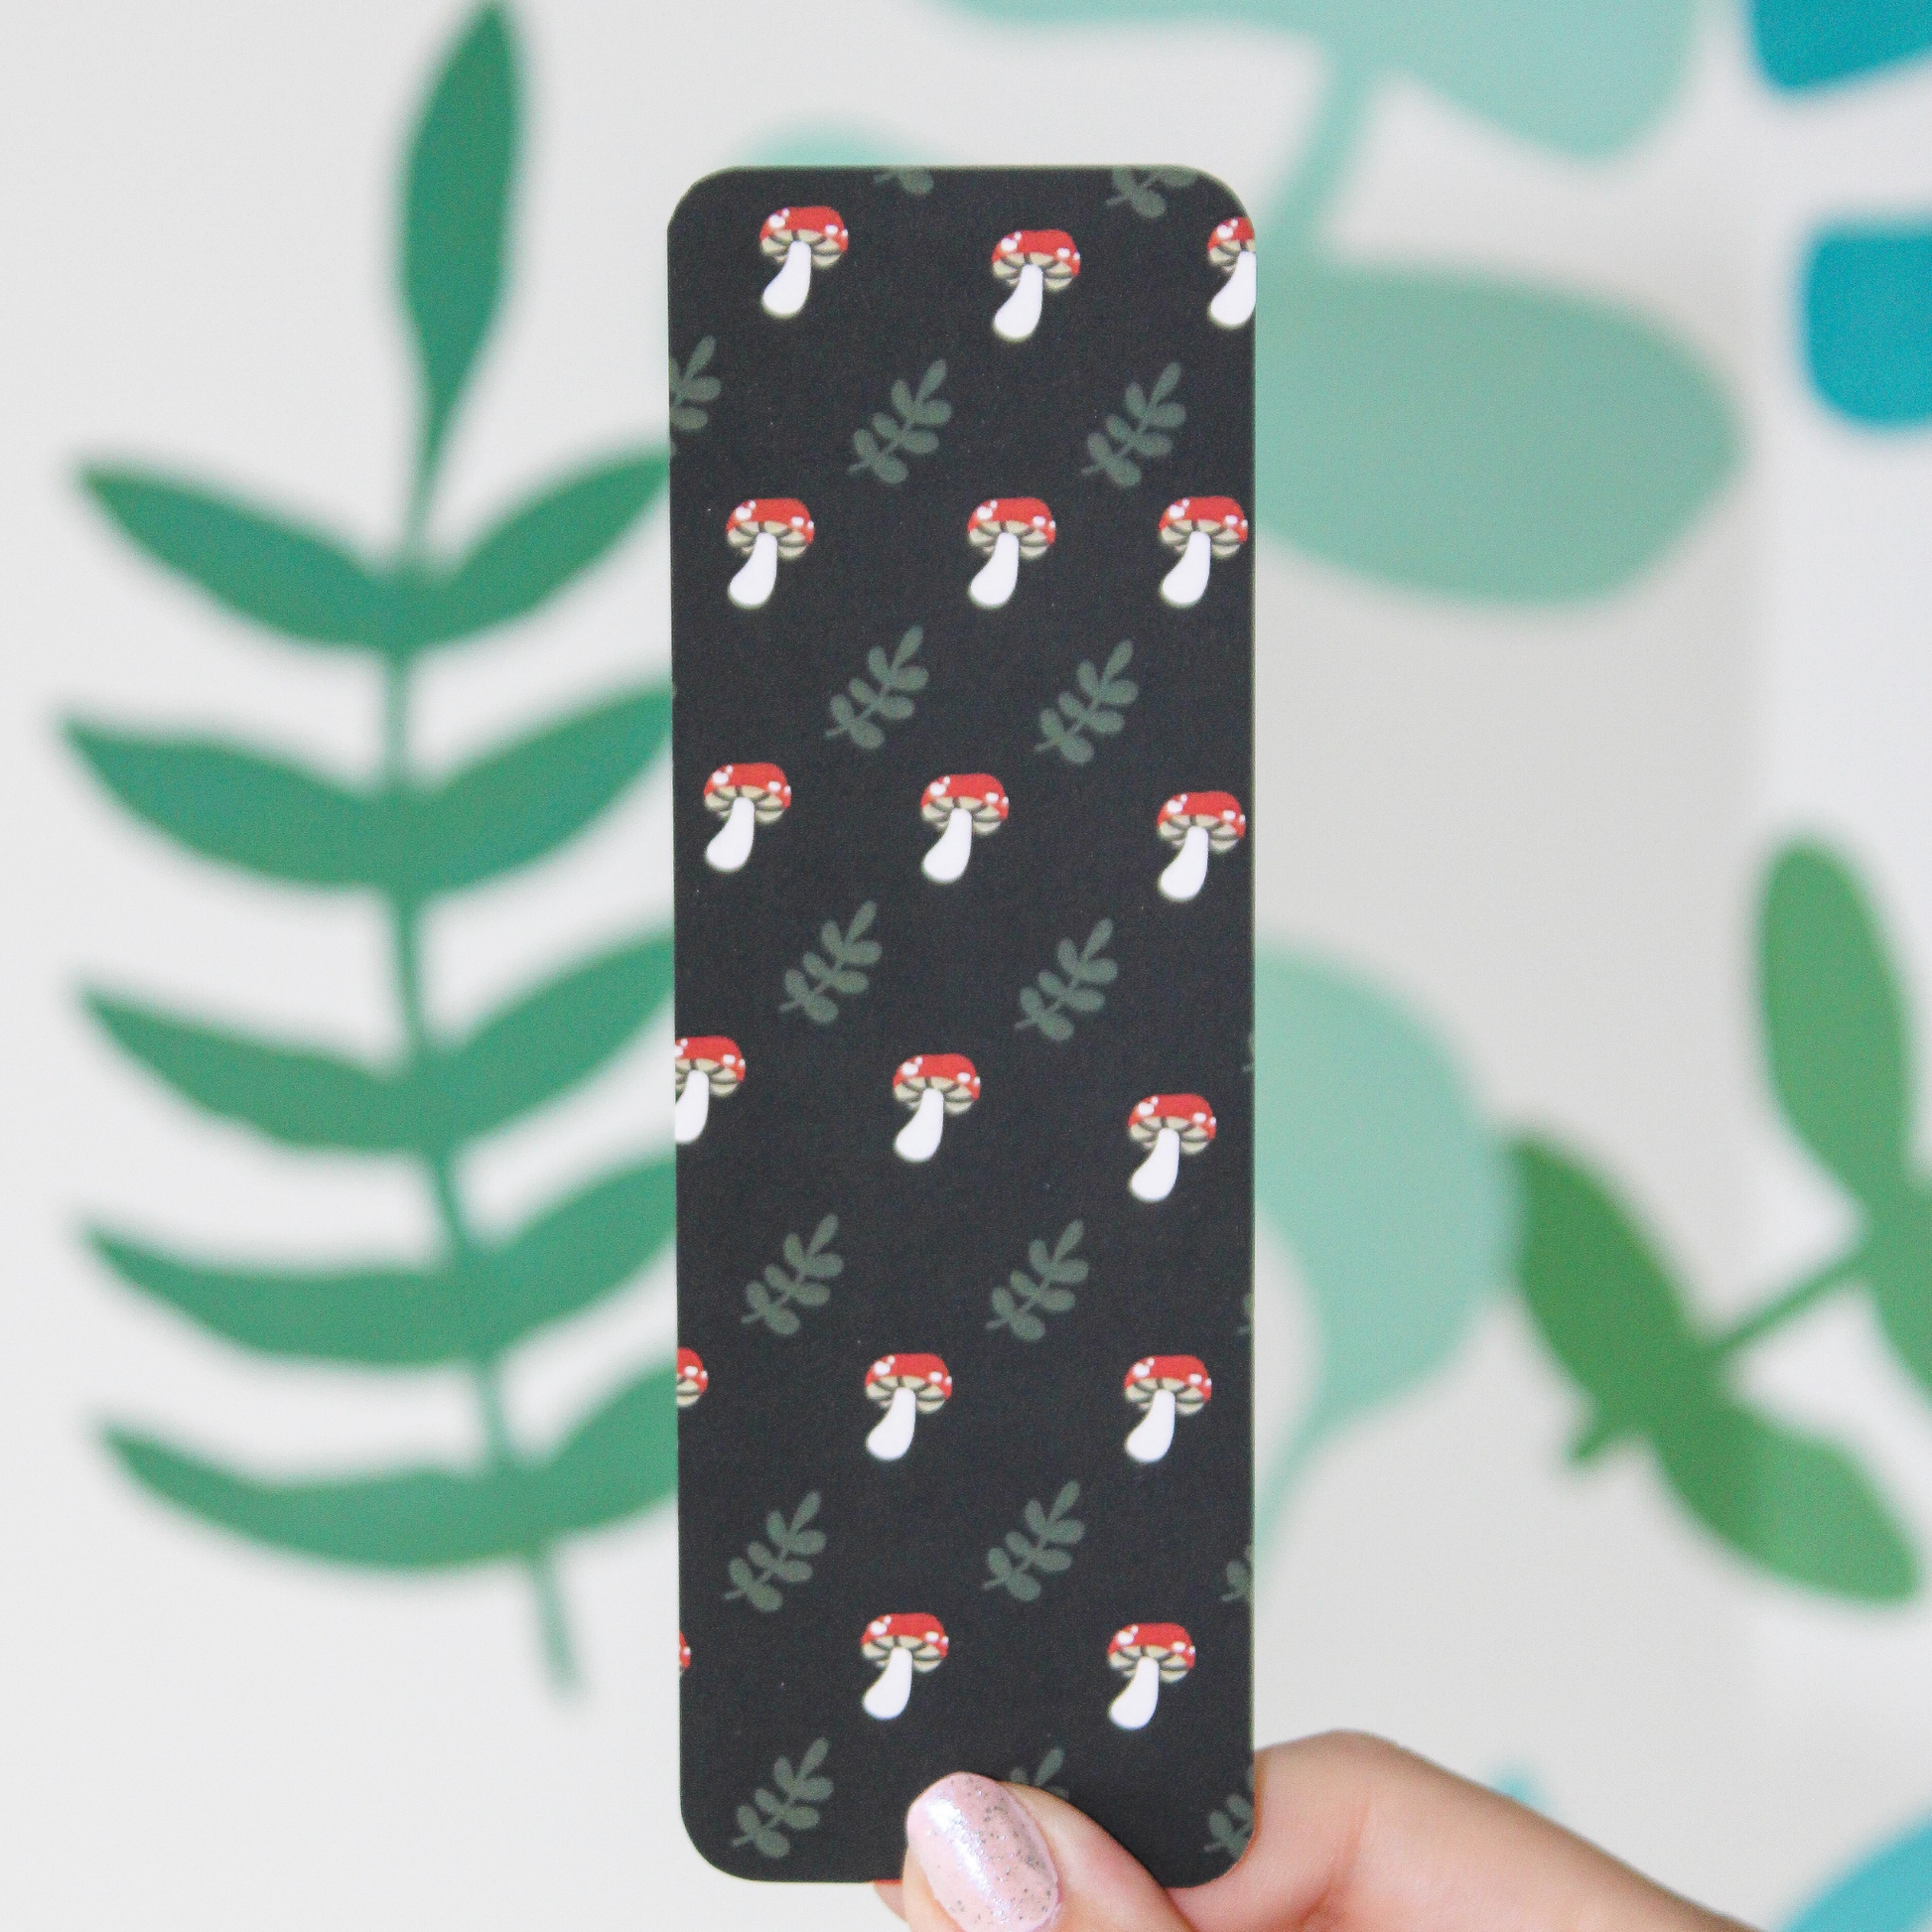 Hand holding black bookmark with a pattern of red mushrooms and leaves on it. Blurred leaf pattern in the background.